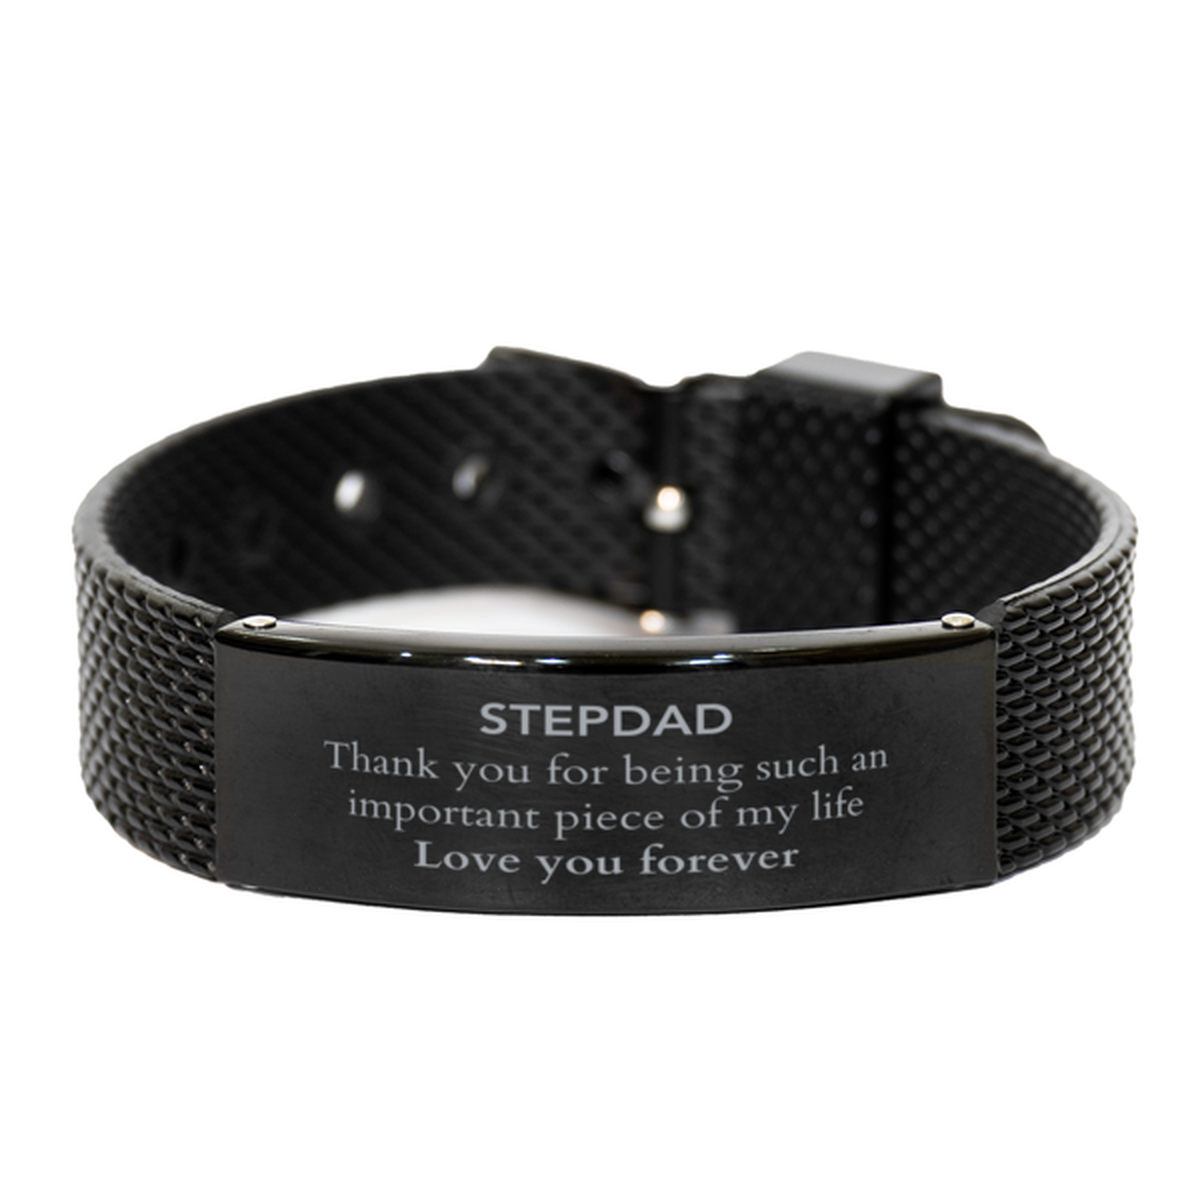 Appropriate Stepdad Black Shark Mesh Bracelet Epic Birthday Gifts for Stepdad Thank you for being such an important piece of my life Stepdad Christmas Mothers Fathers Day